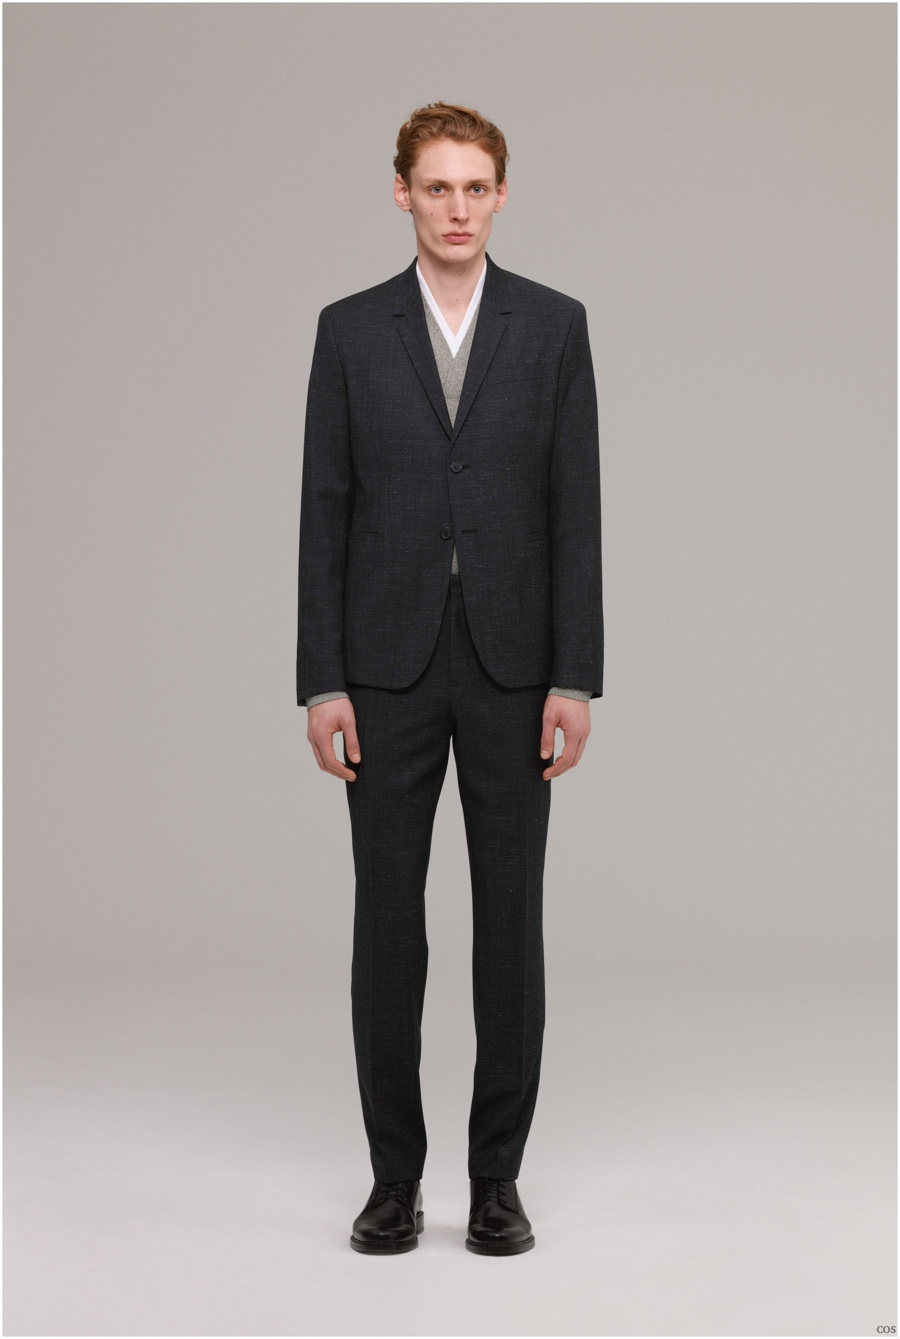 COS Fall/Winter 2015 Menswear Collection